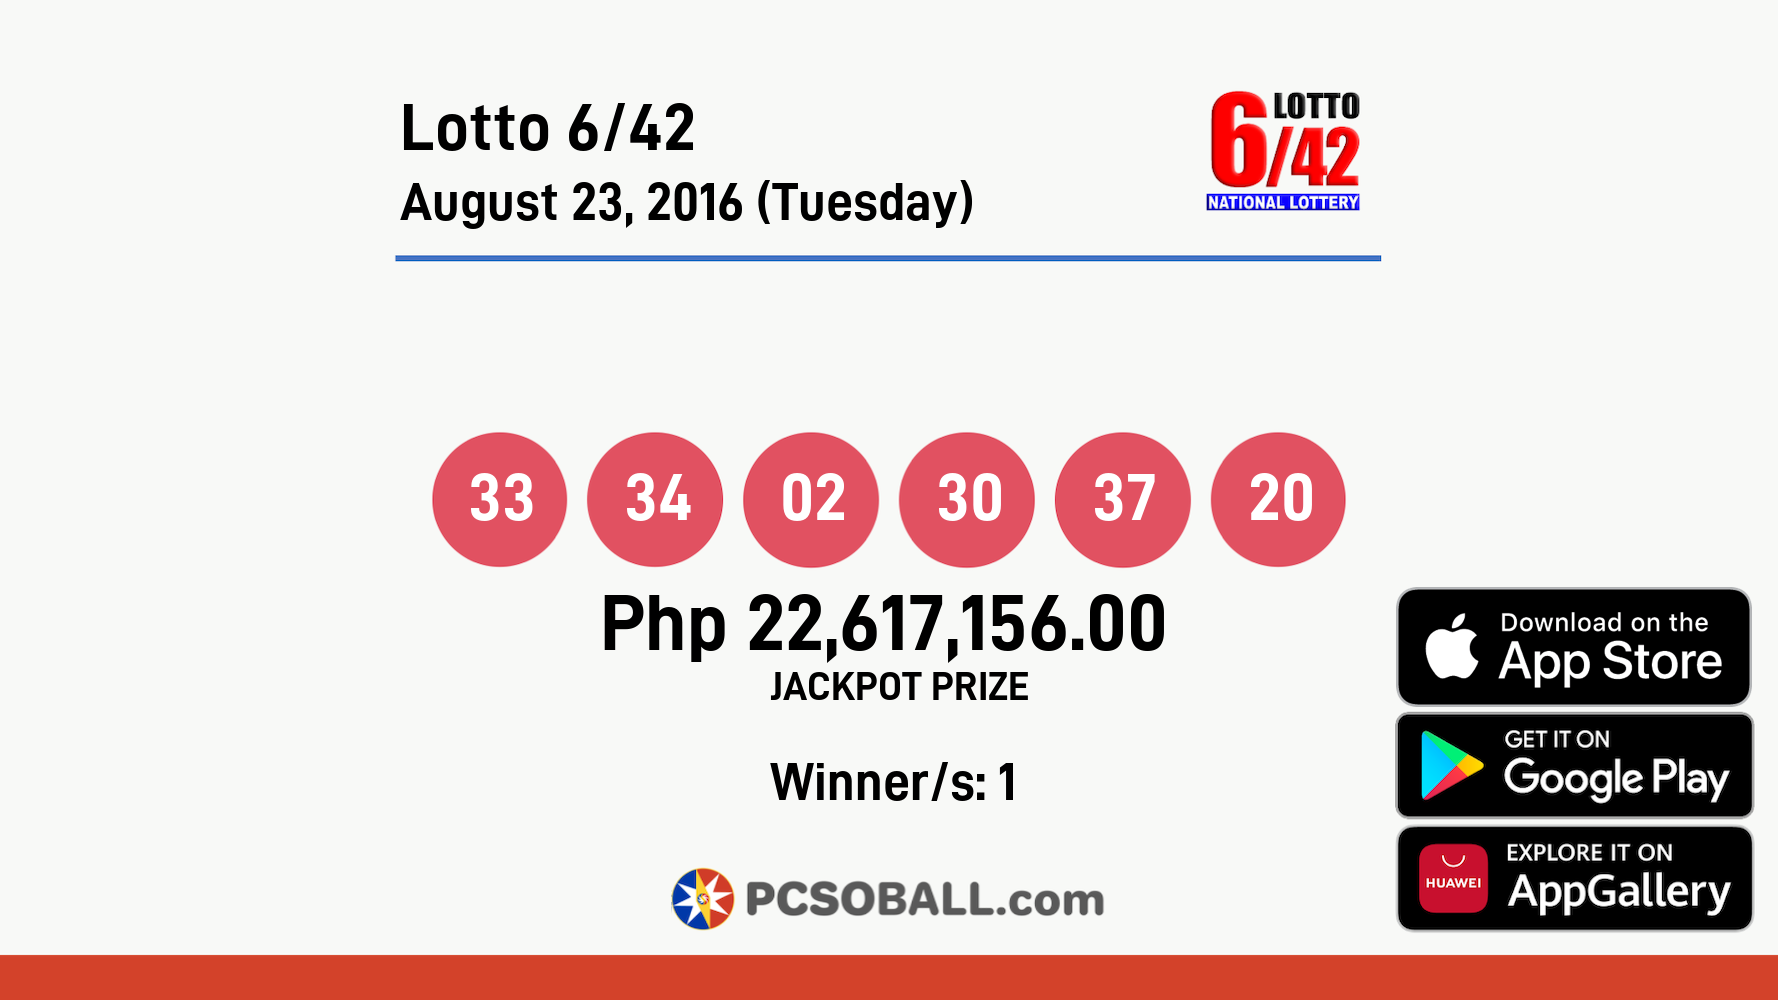 Lotto 6/42 August 23, 2016 (Tuesday) Result